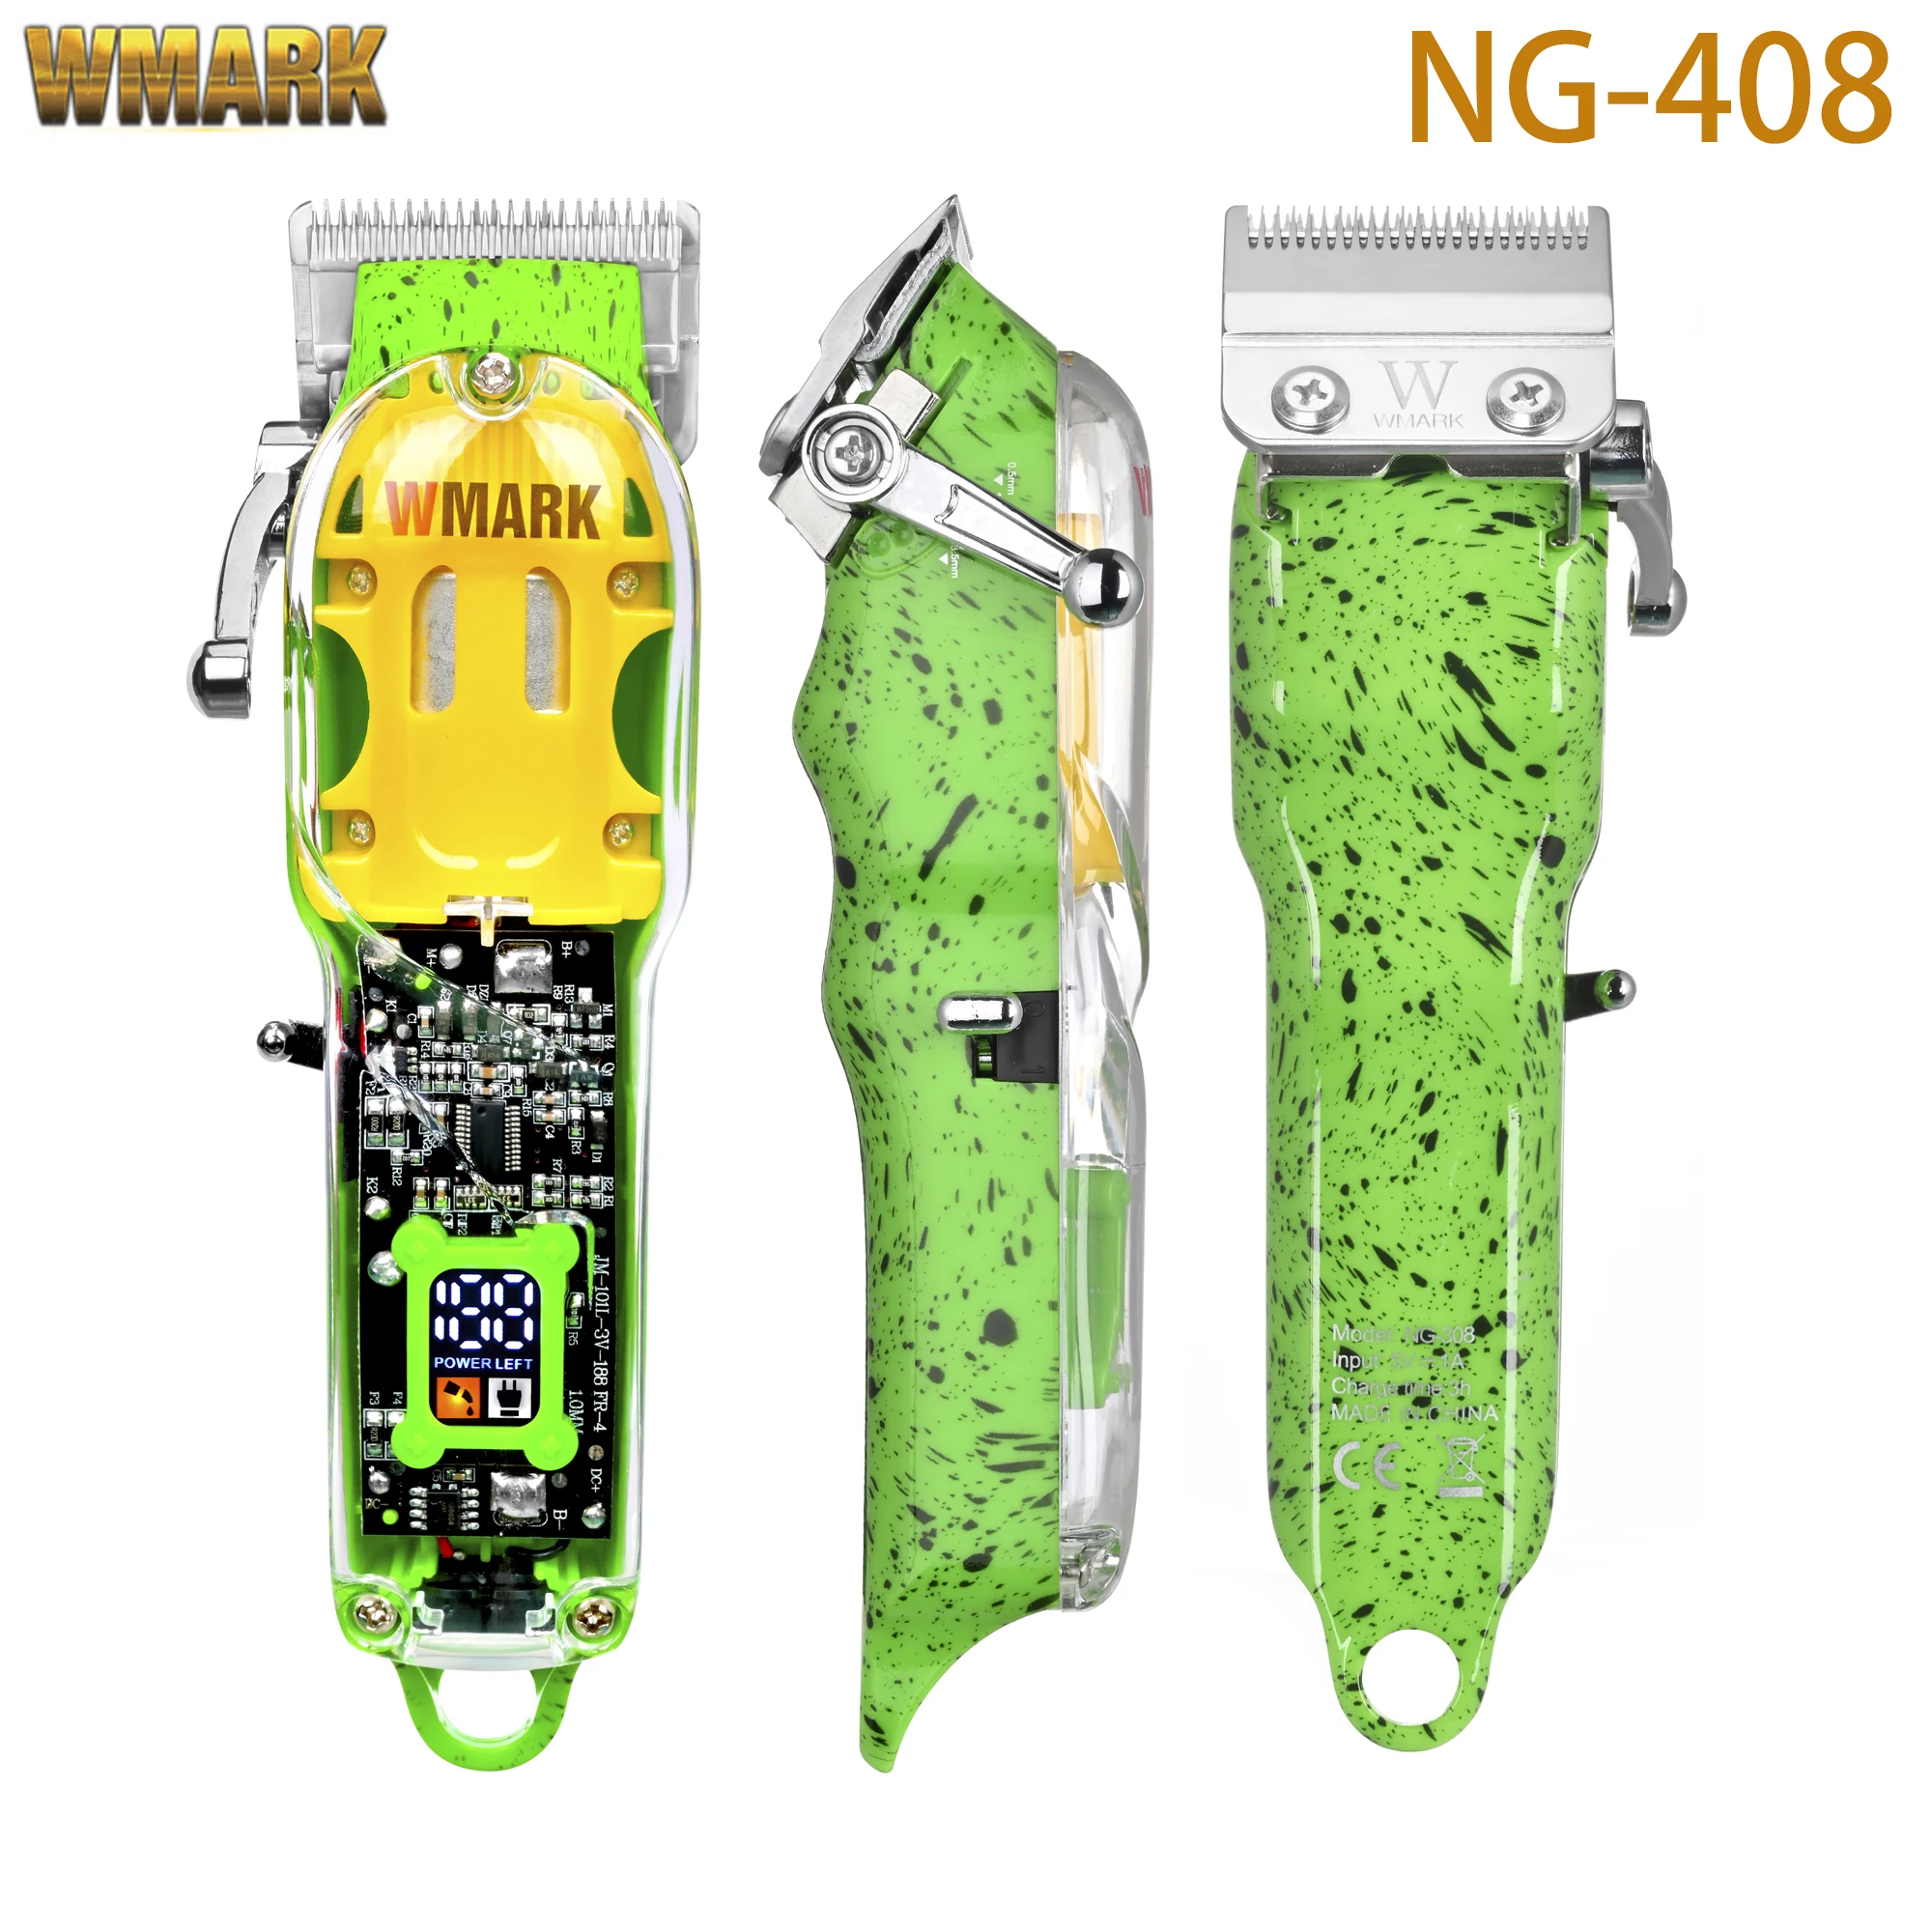 WMARK NG-408 Transparent Hair Clipper Professional Rechargeable Clipper Hair Trimmer With LED Power Display 6500 RPM Motor Speed